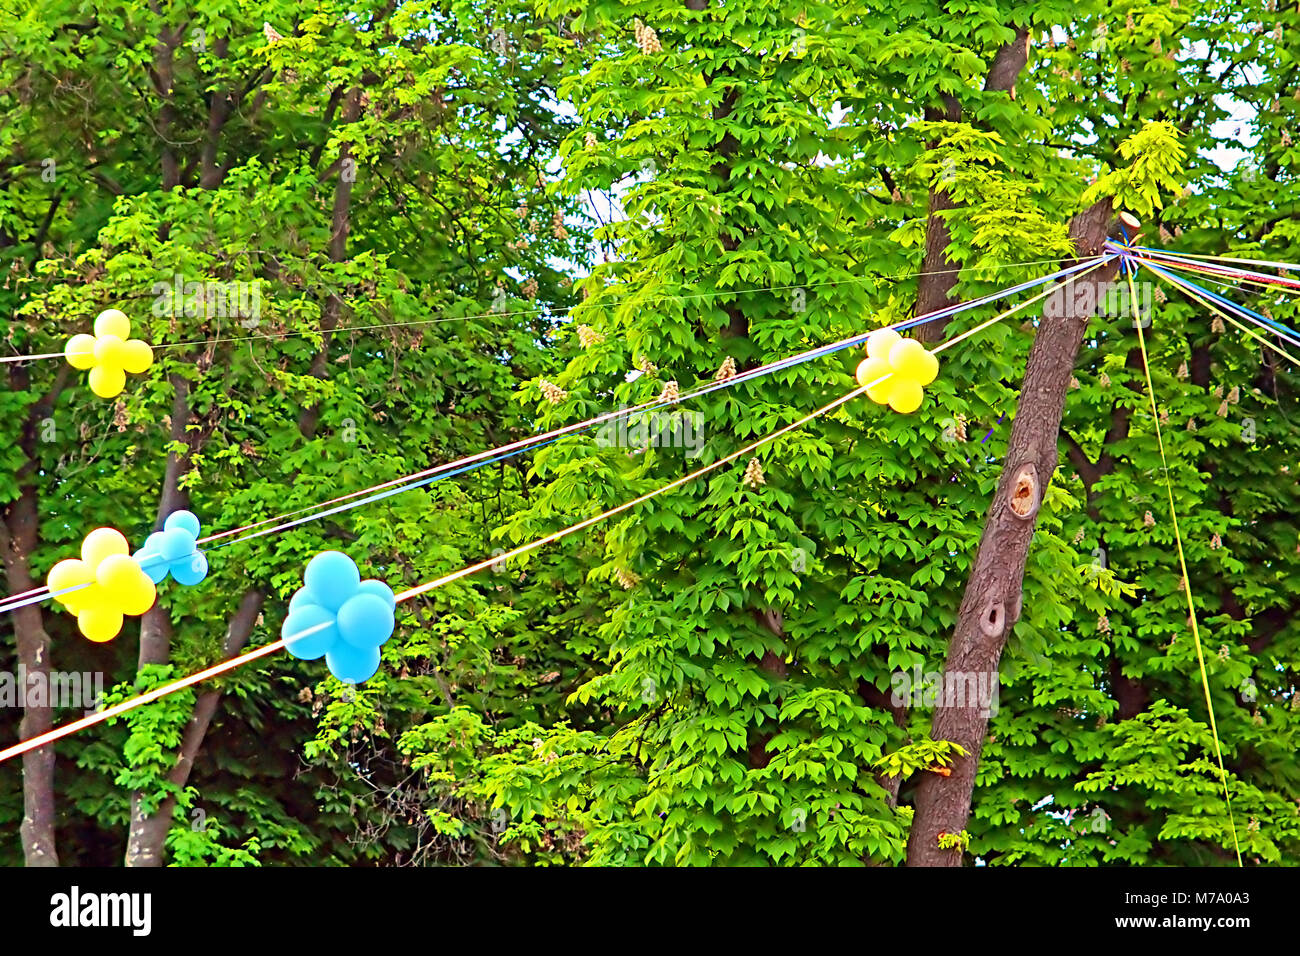 Balloons and ribbons in th colors of Ukrainian national flag over green spring foliage Stock Photo